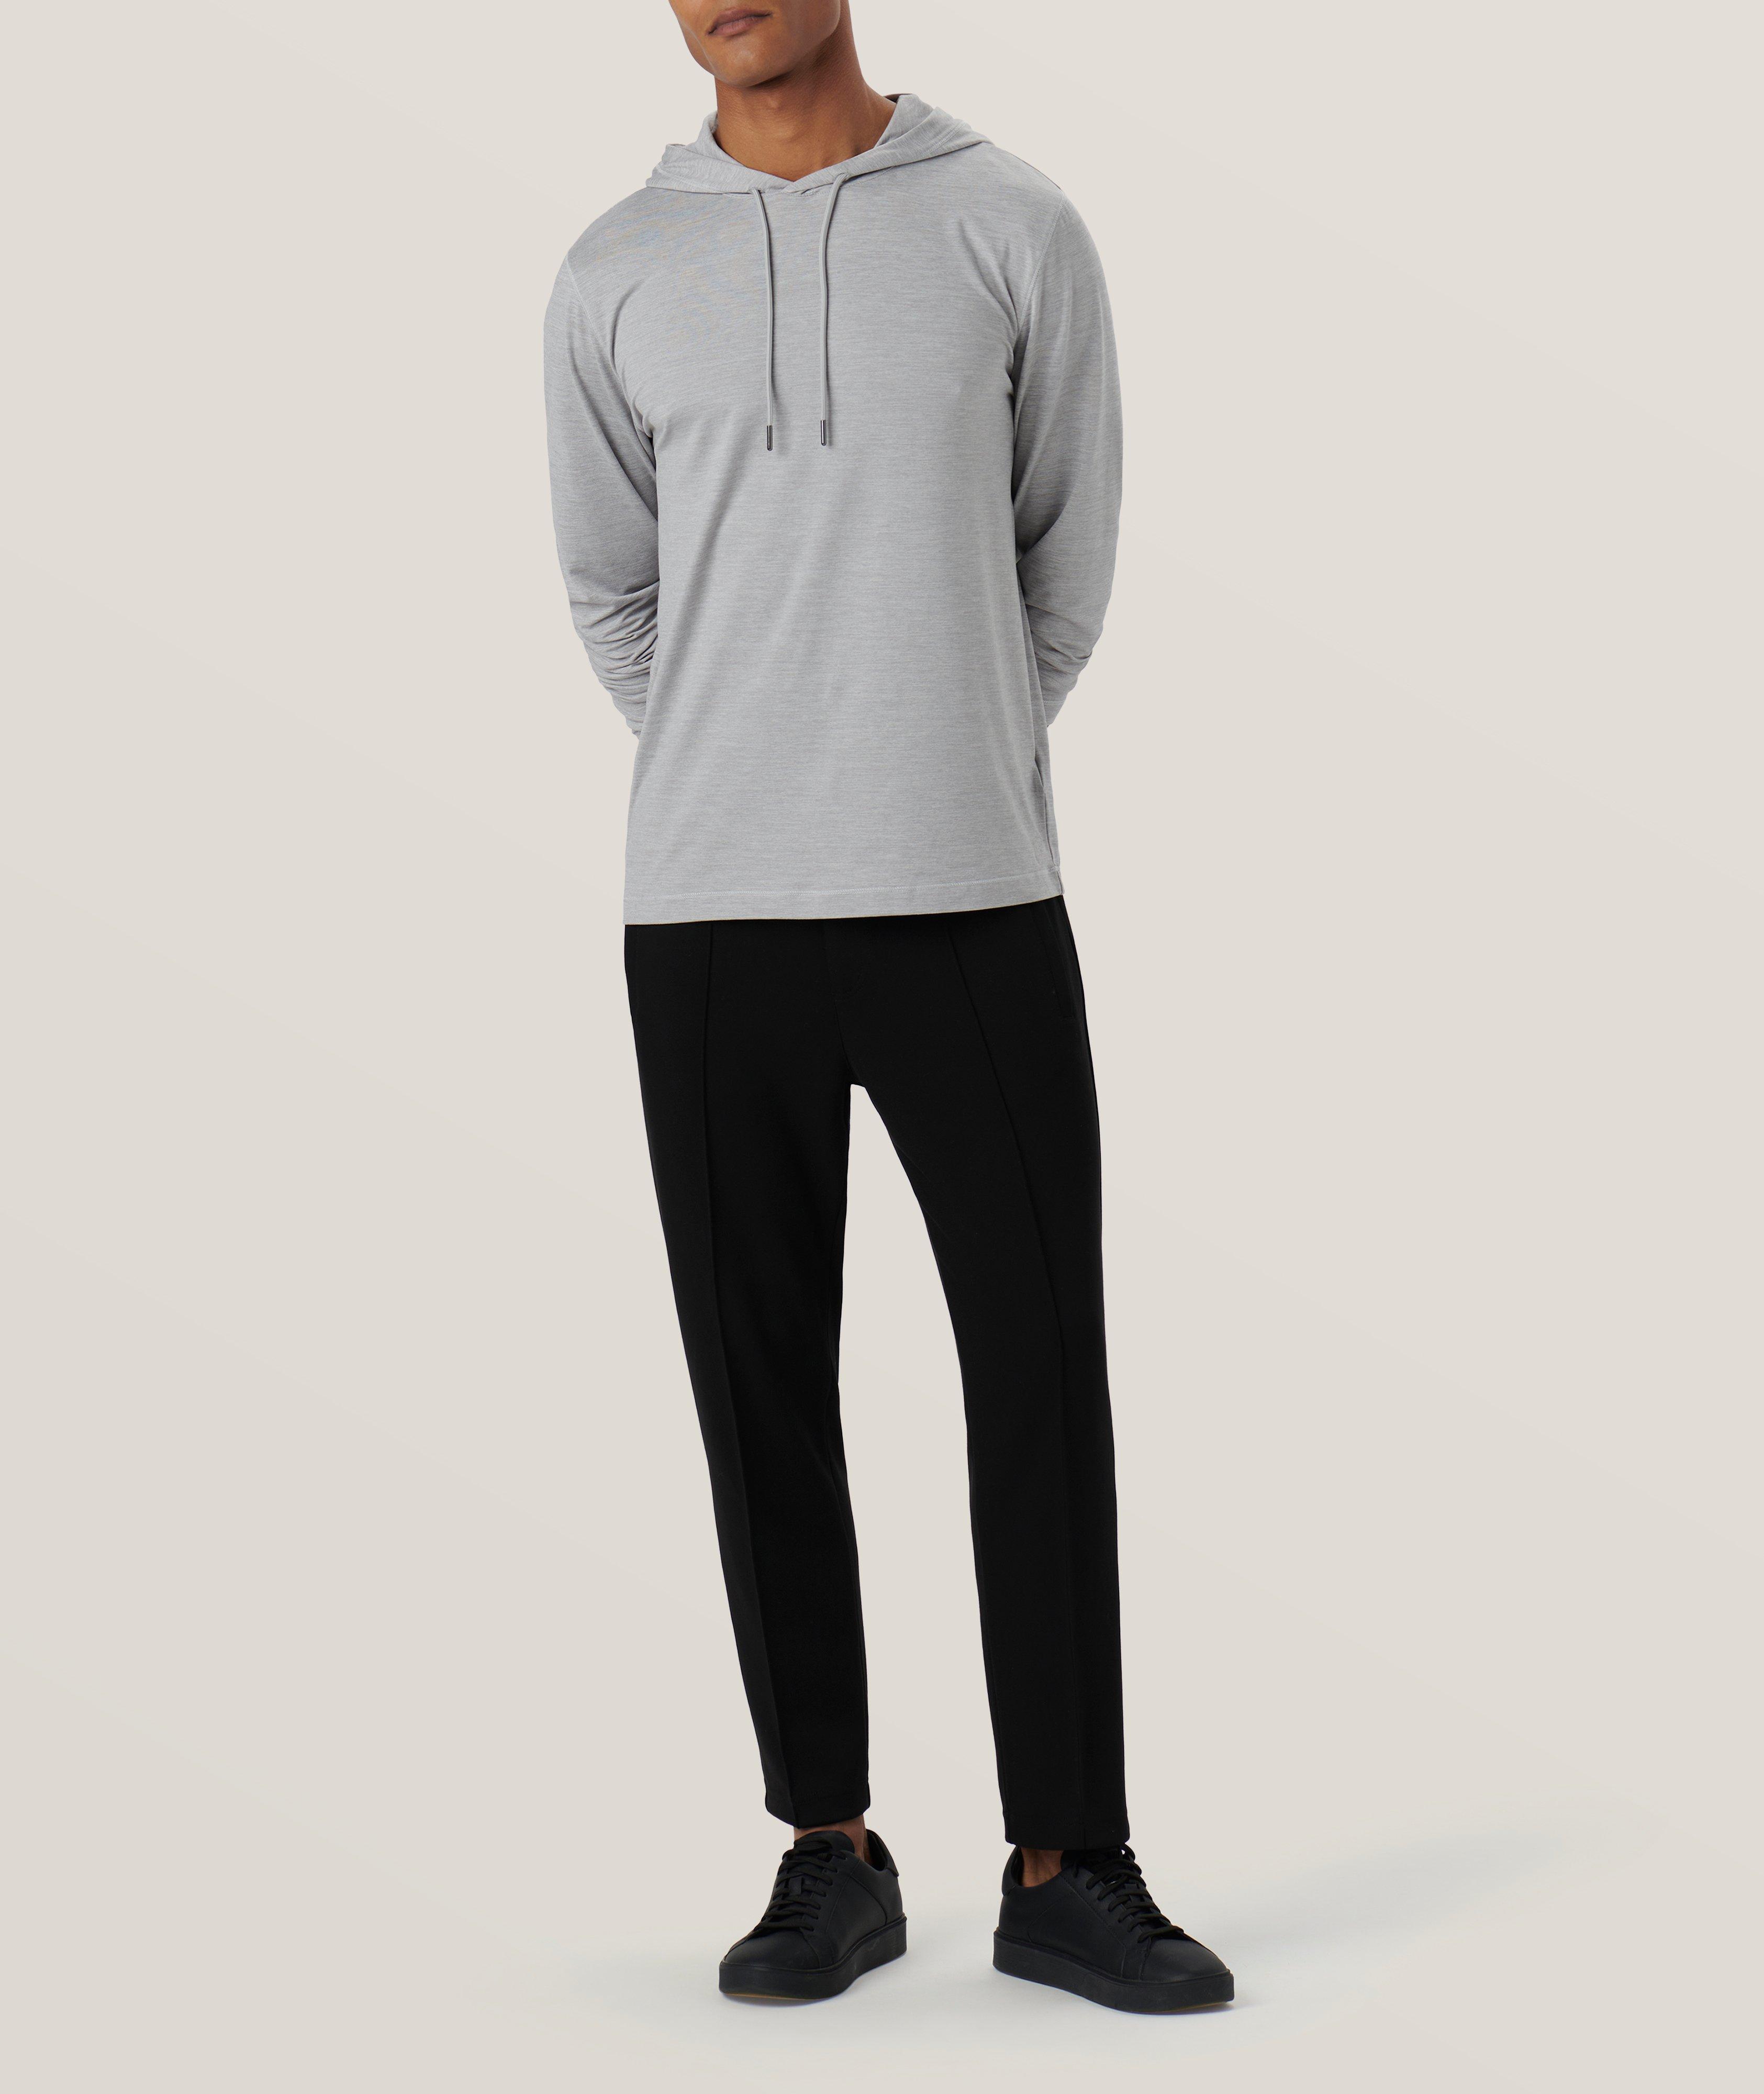 UV50 Performance Stretch-Fabric Hooded Sweater image 5